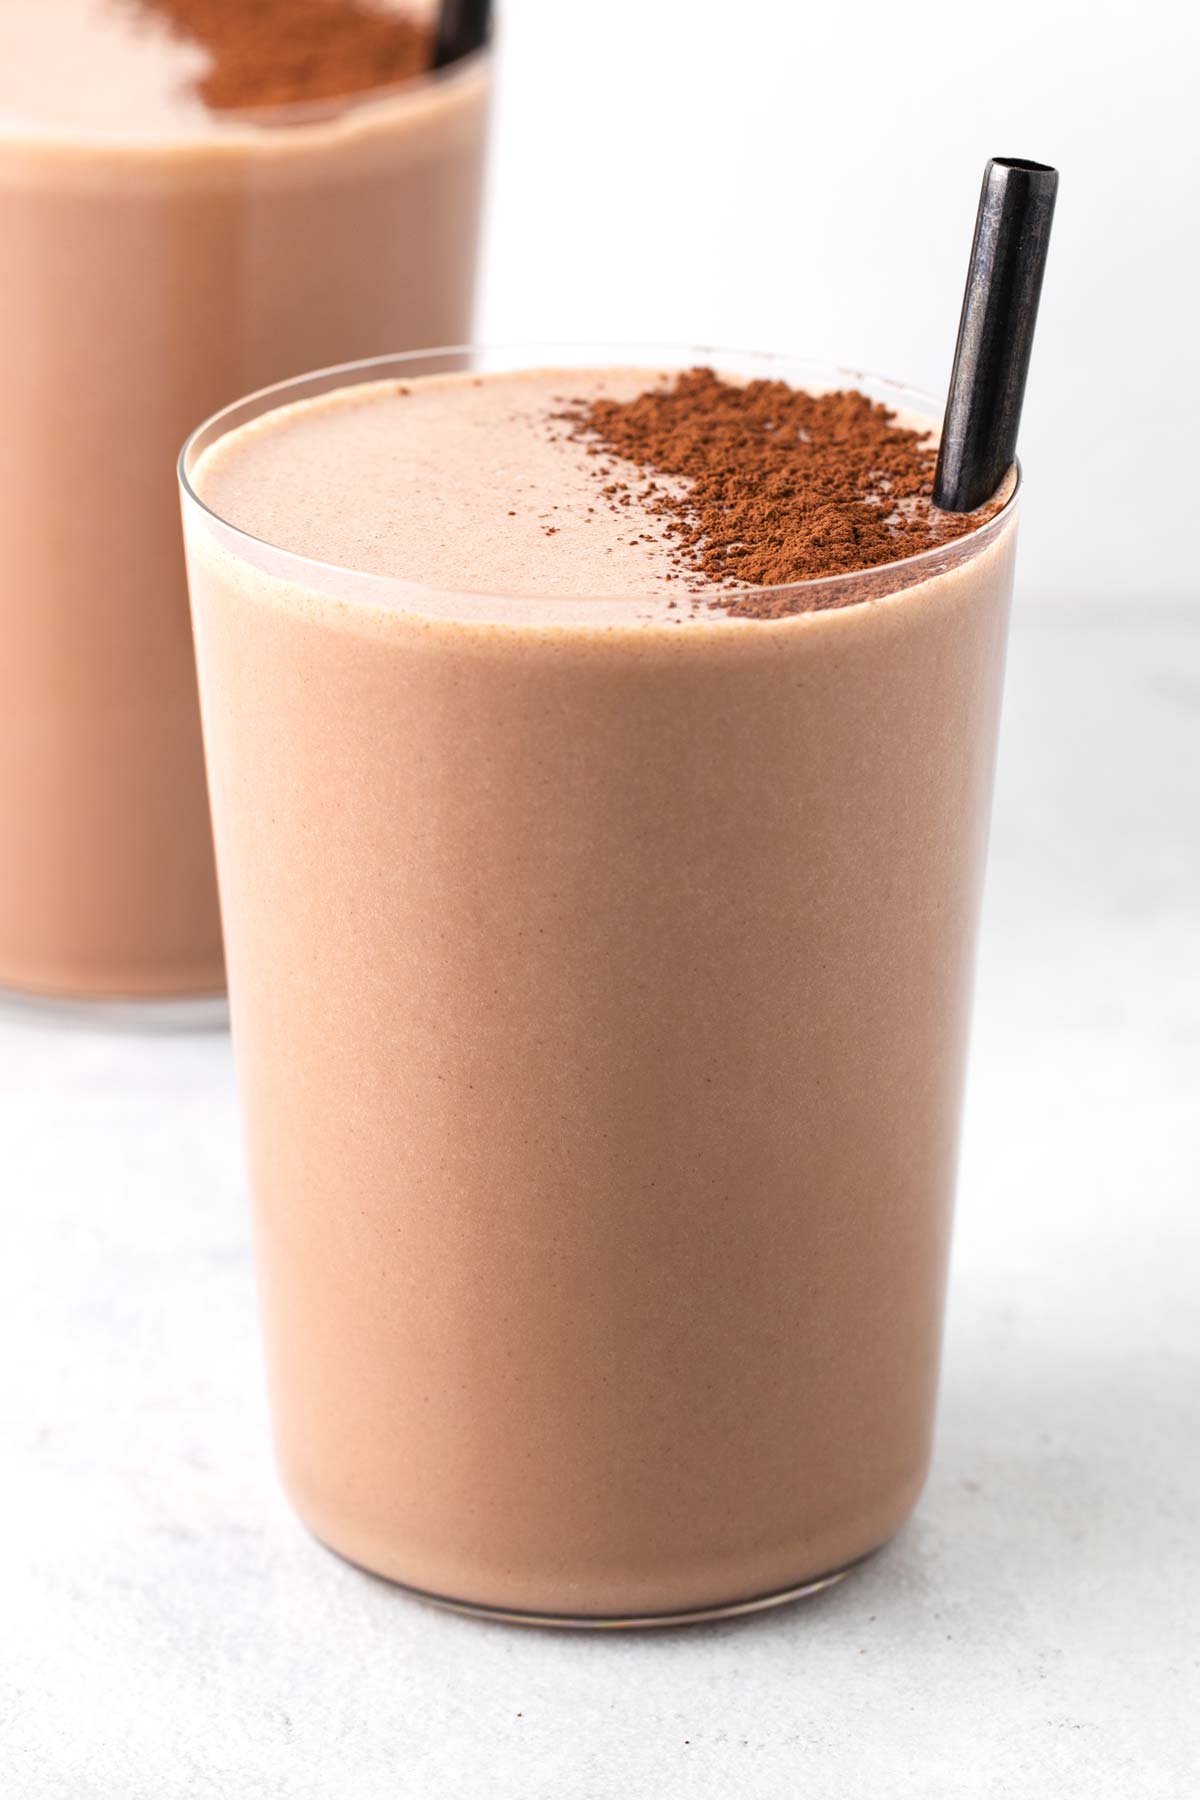 Chocolate almond protein shake in a glass.